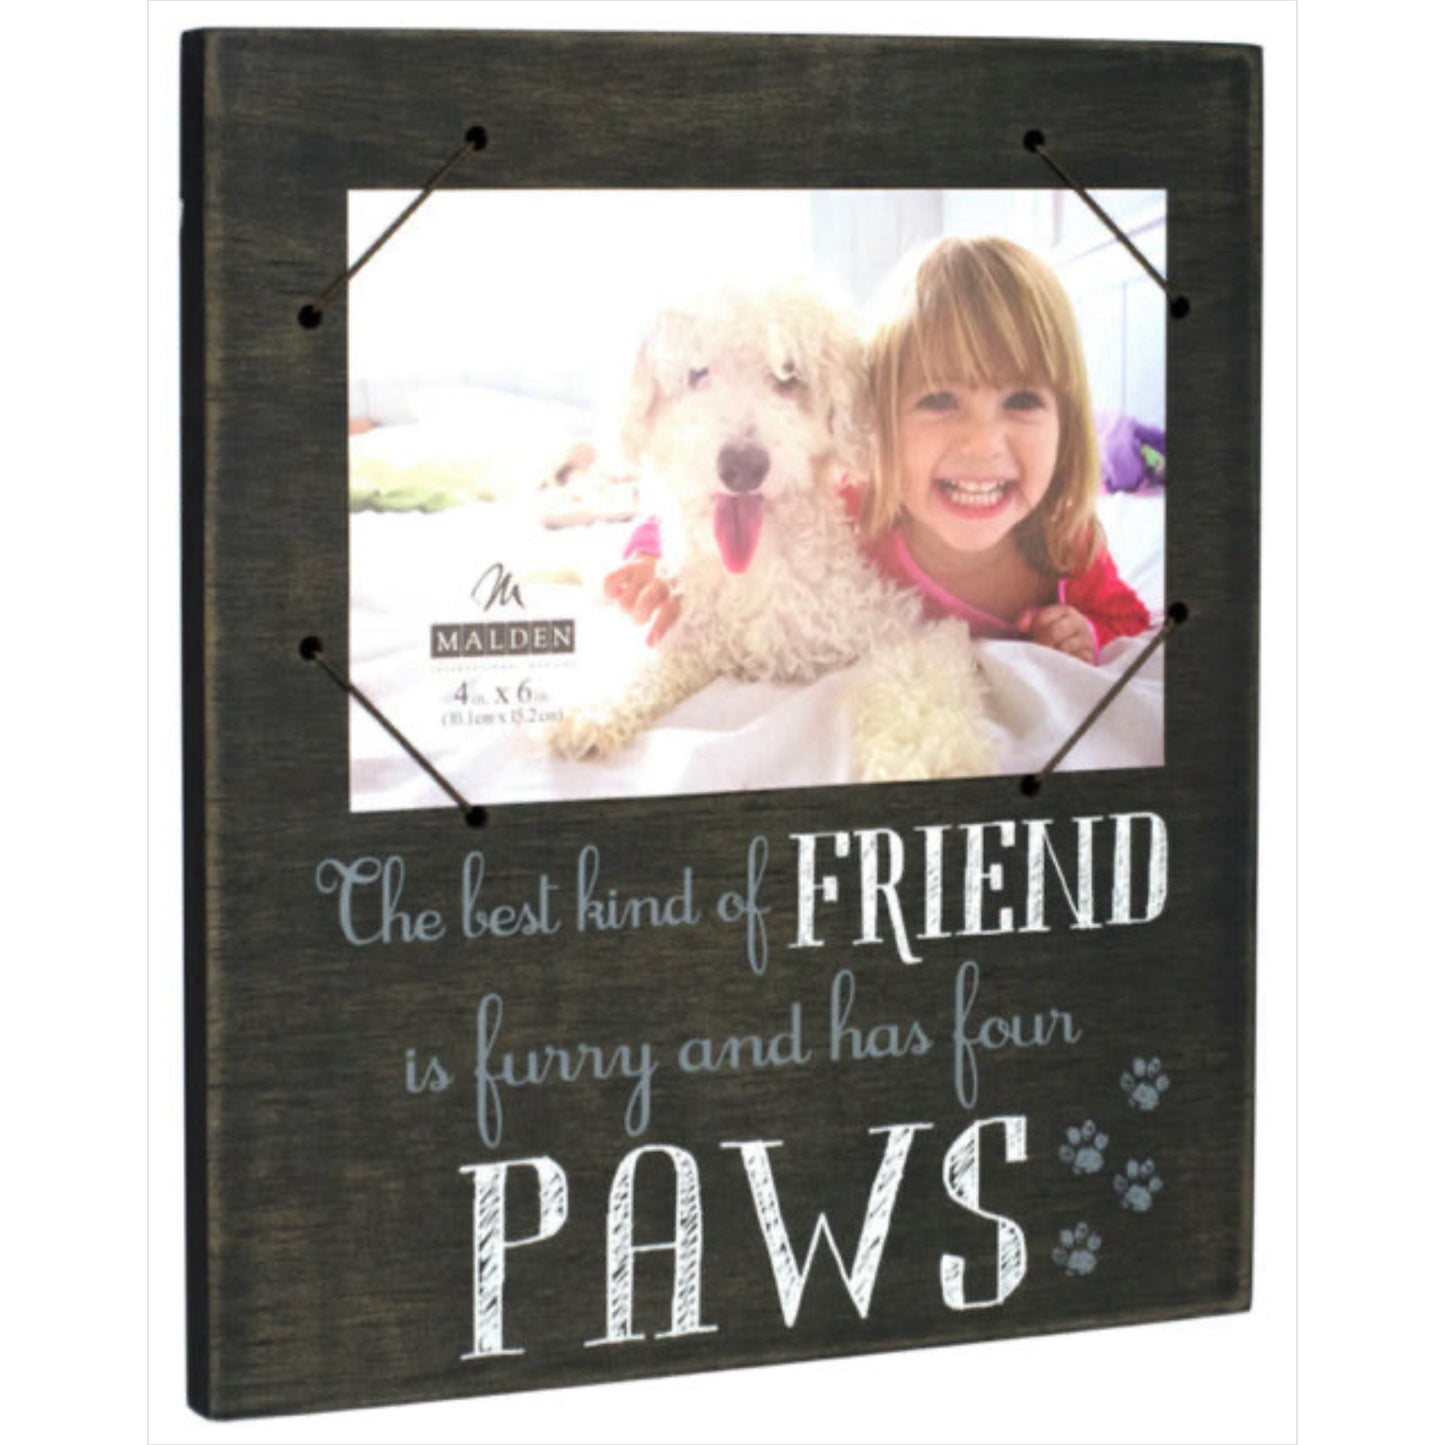 The Best Kind of Friend is Furry and Has Four Paws Picture Frame